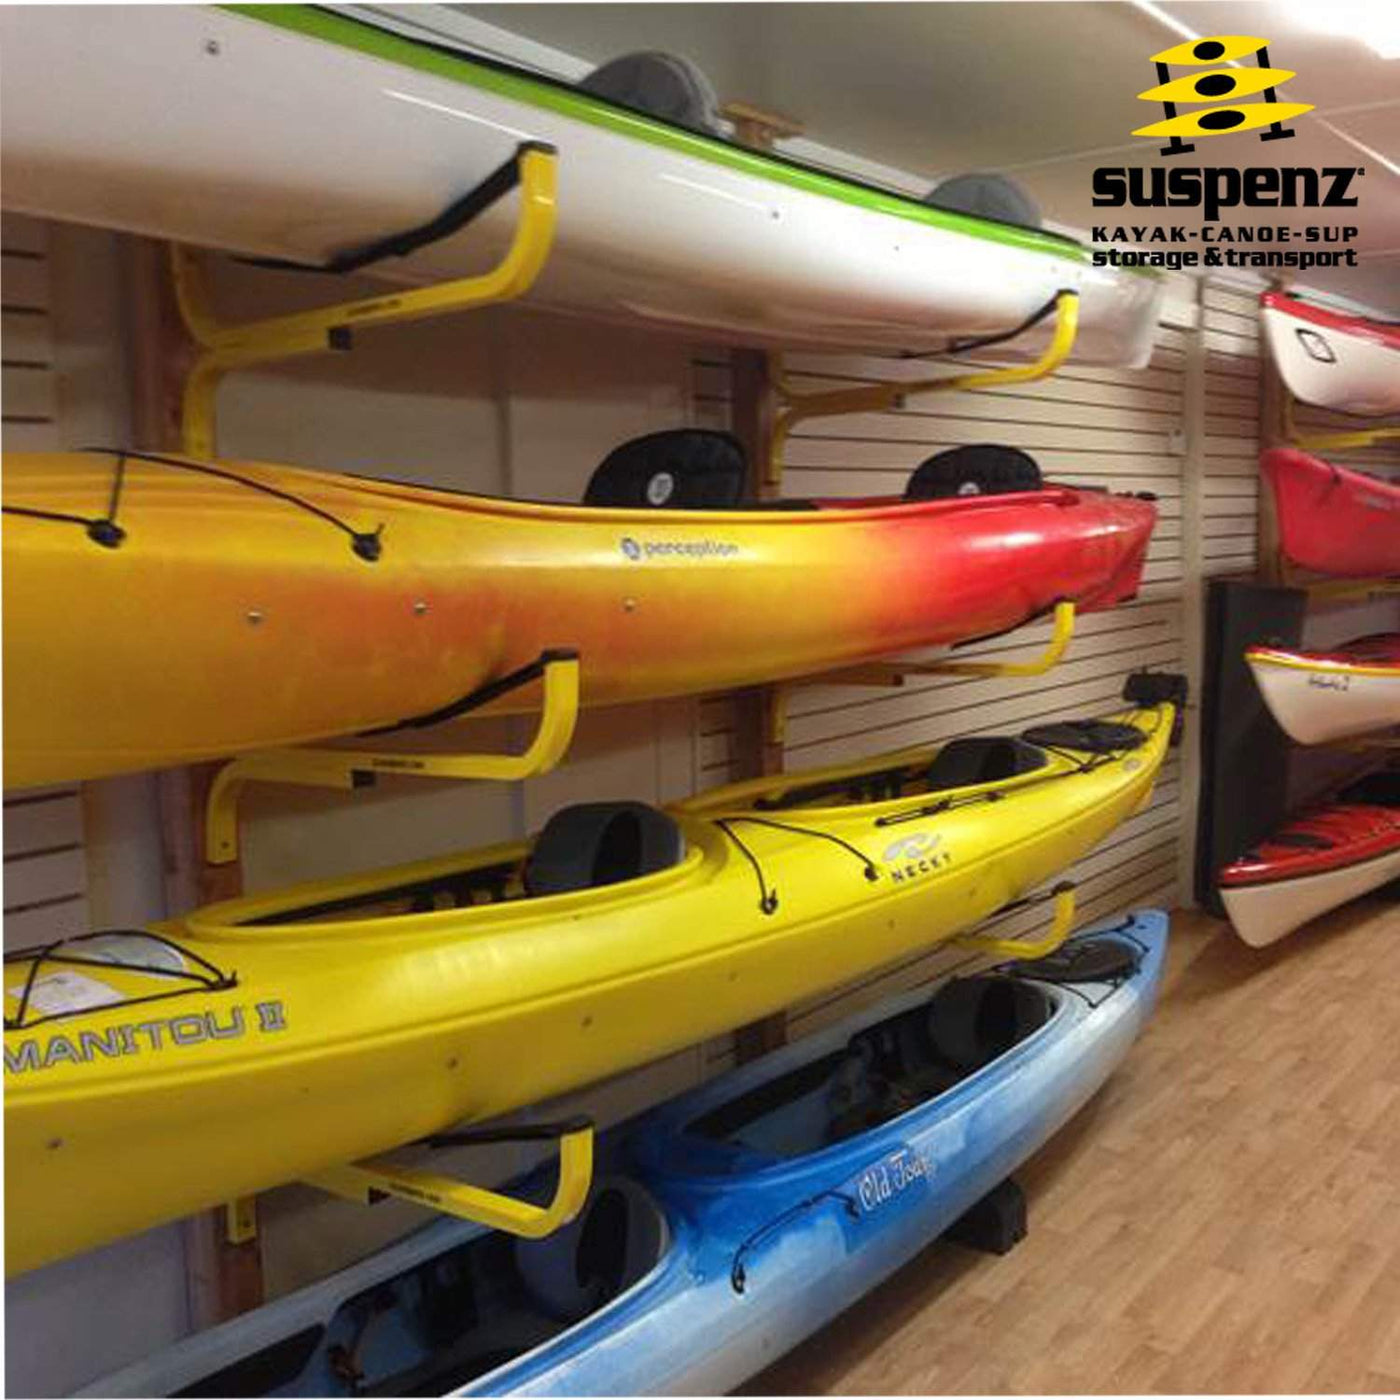 8 kayaks stored on FLAT Racks in a store.